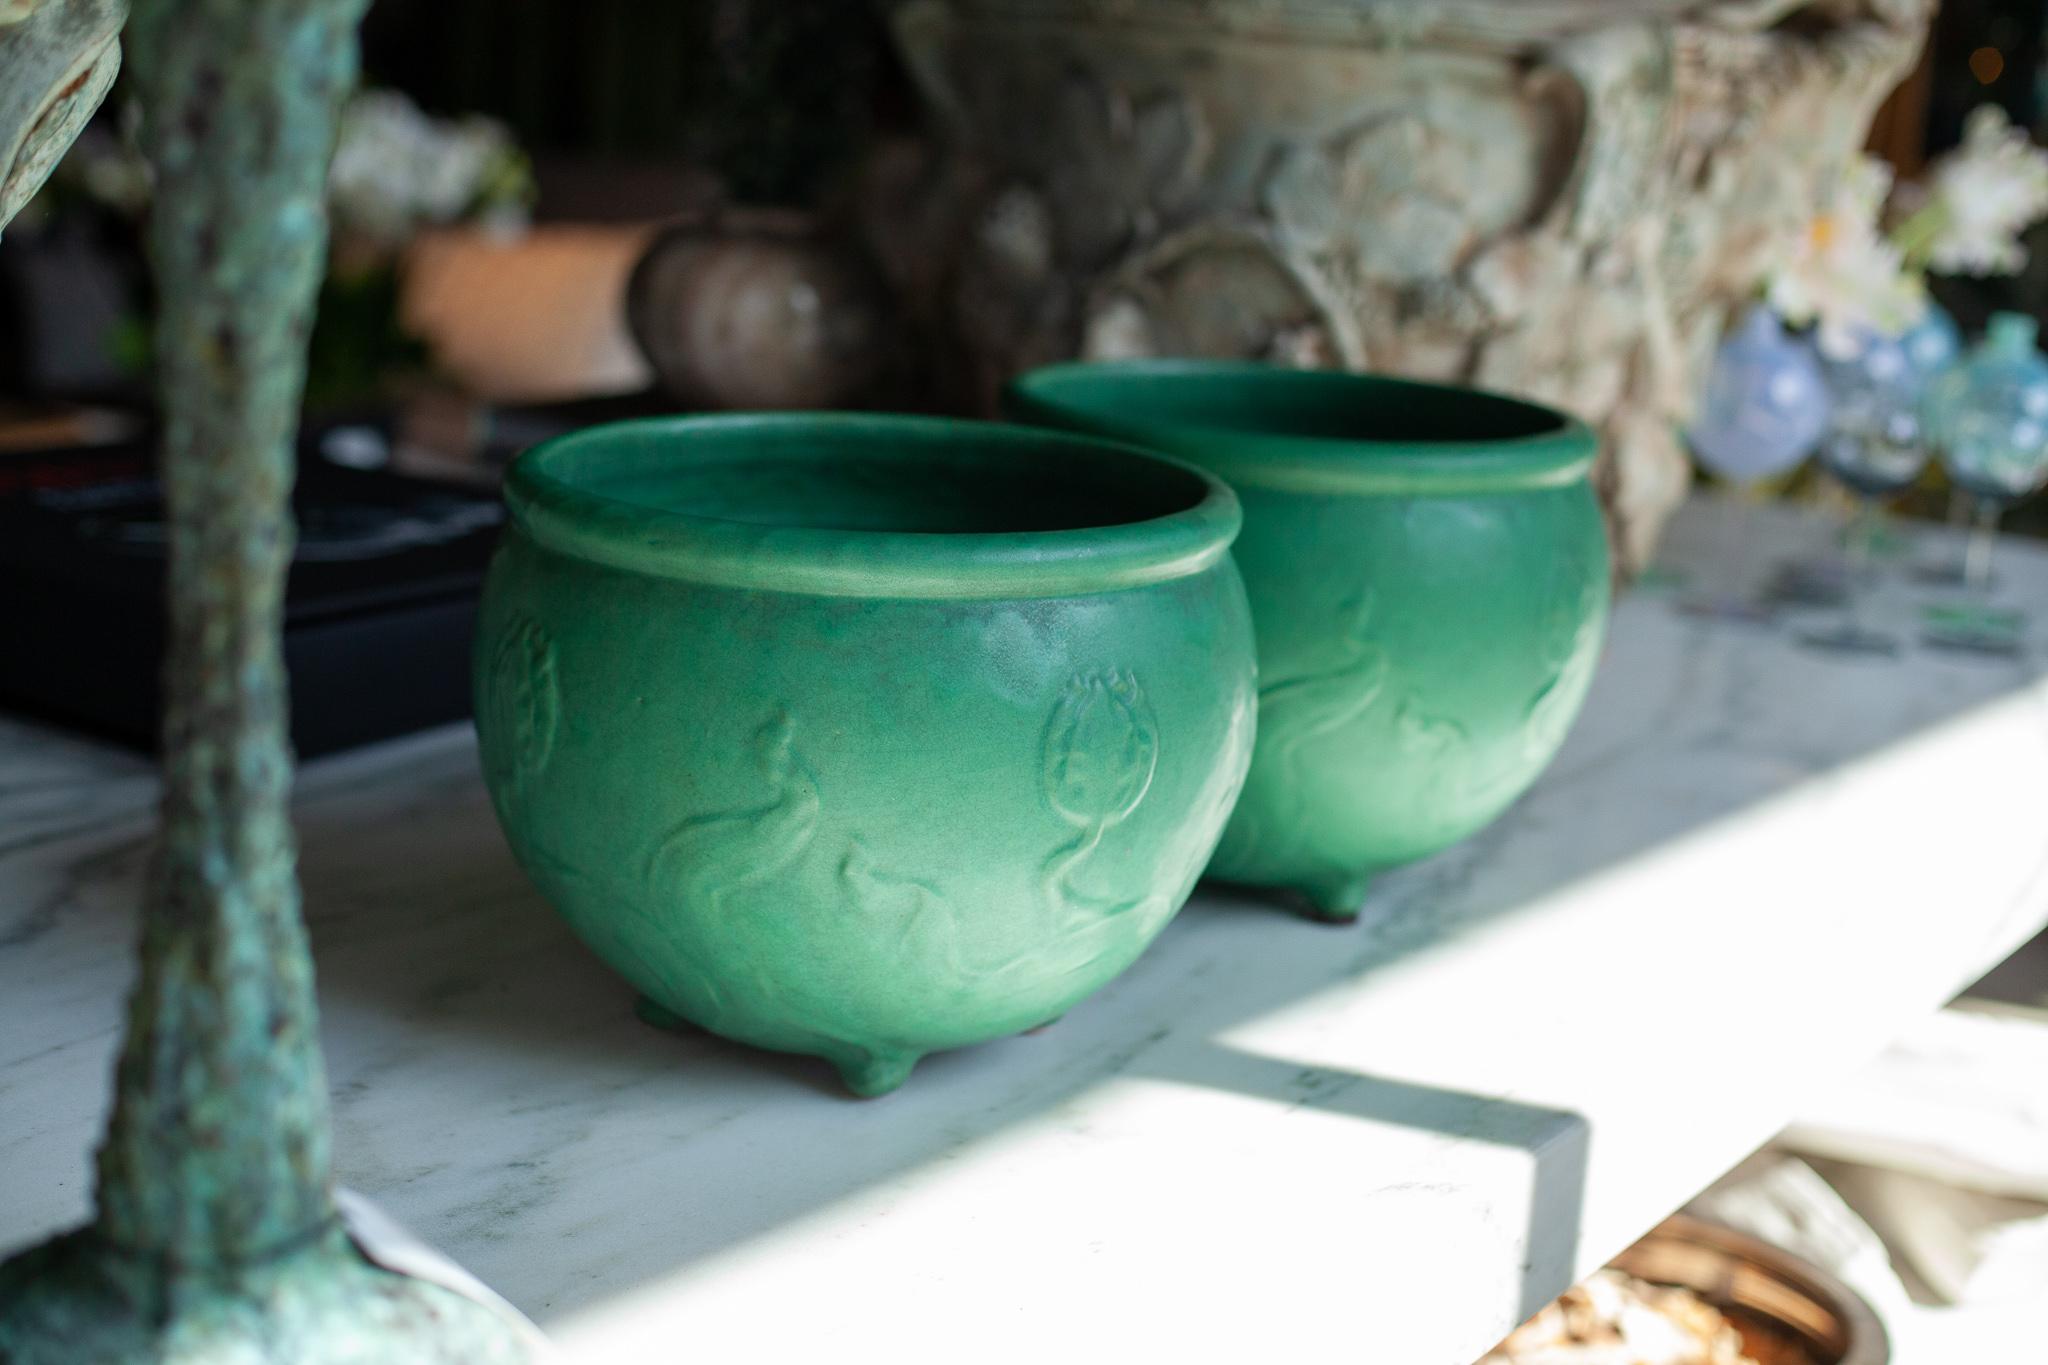 Fleurdetroit presents for your consideration this pair of Owens jardinieres from the American Arts and Crafts Movement. 

A rare opportunity to have not one, but two matching jardinières made by the Owens pottery company. A delightful tulip motif